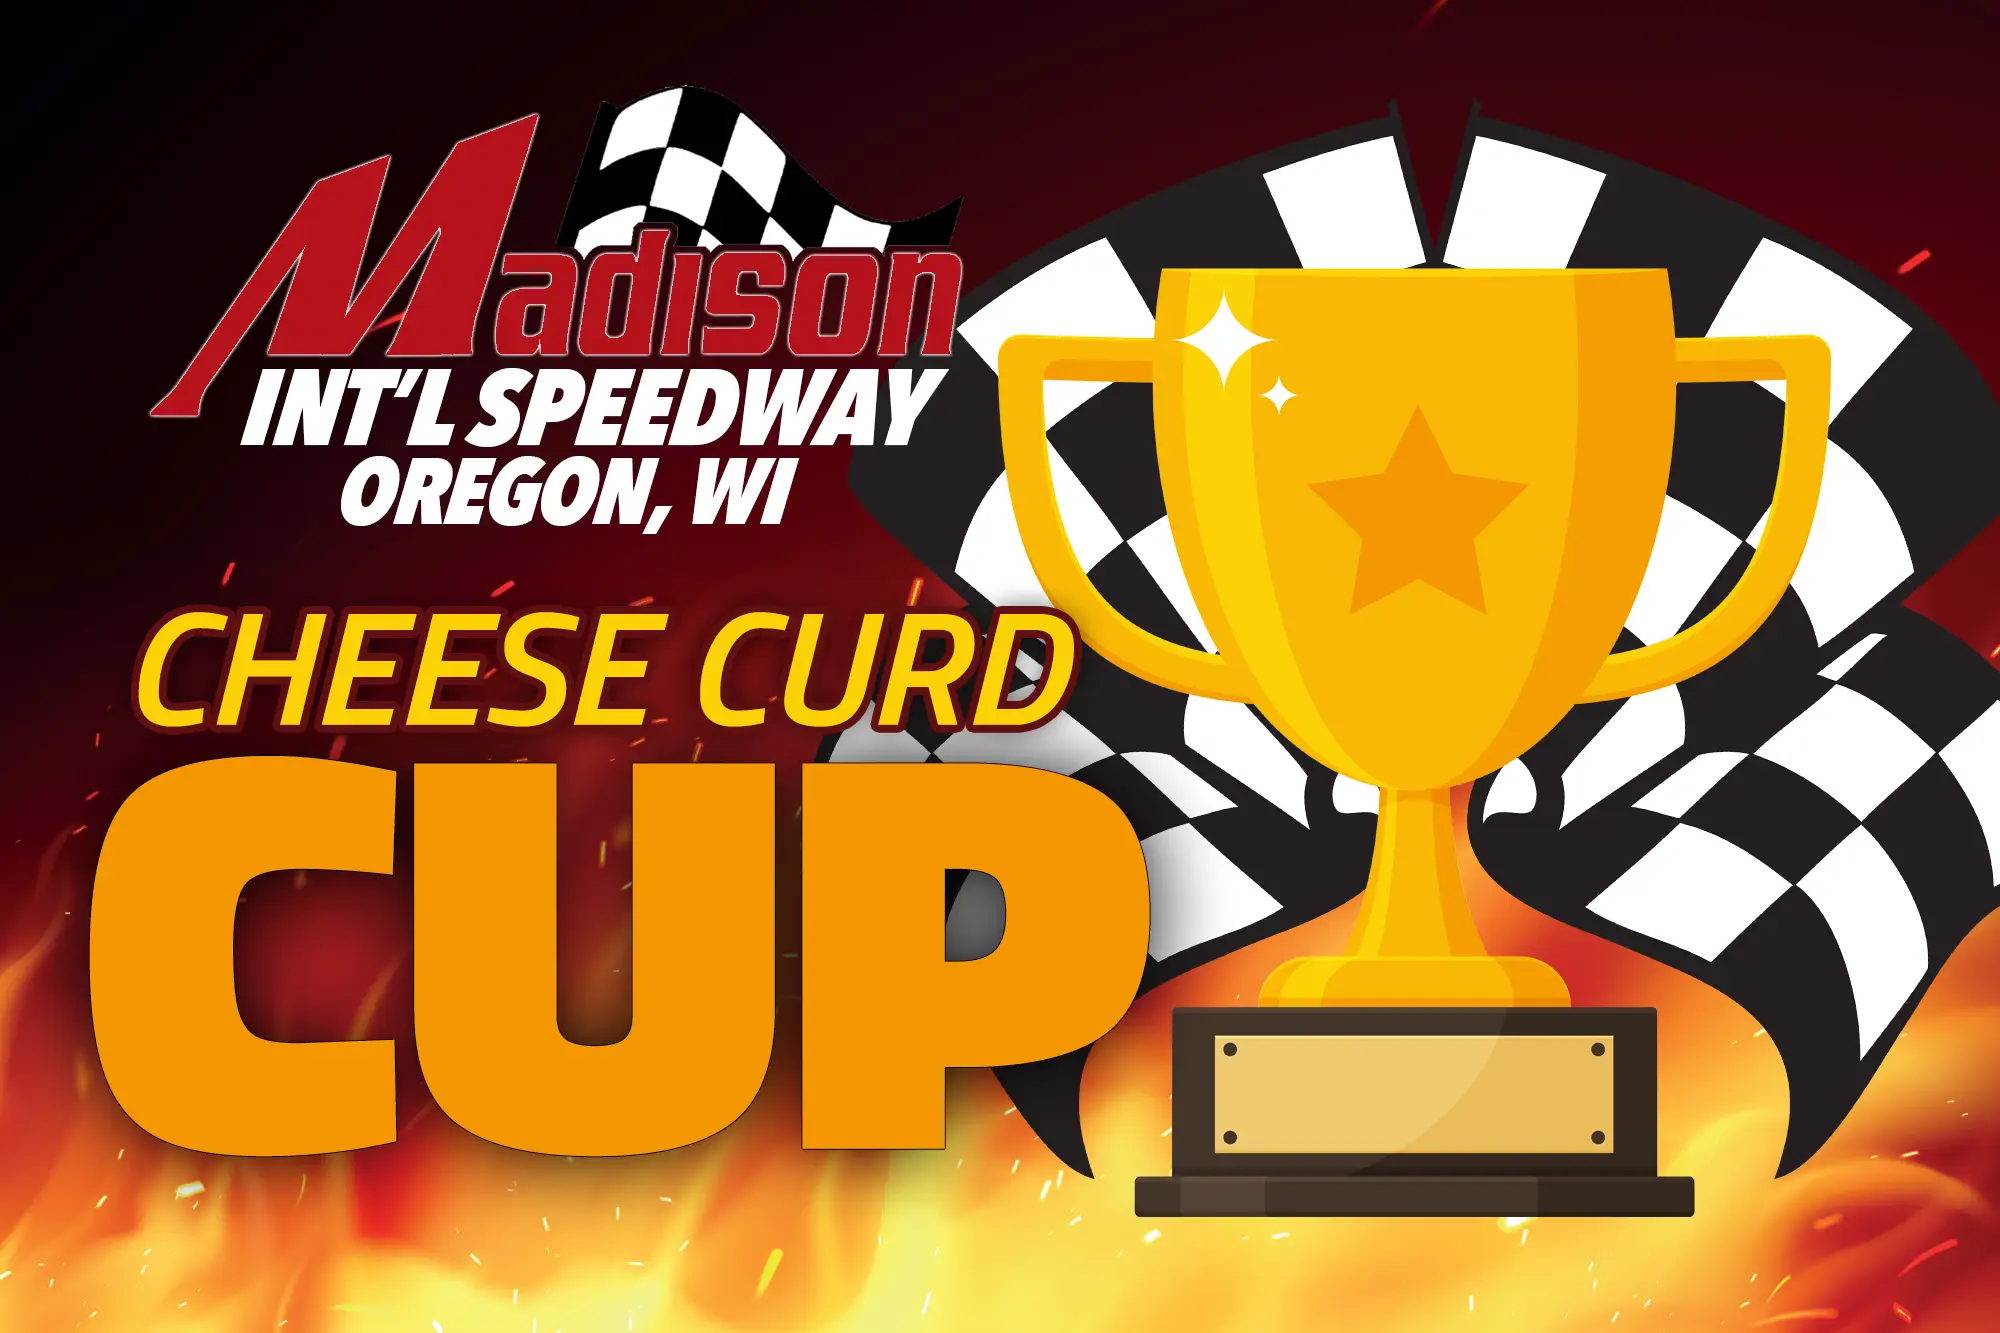 Featured image for “4th annual Cheese Curd Cup at Madison International Speedway”